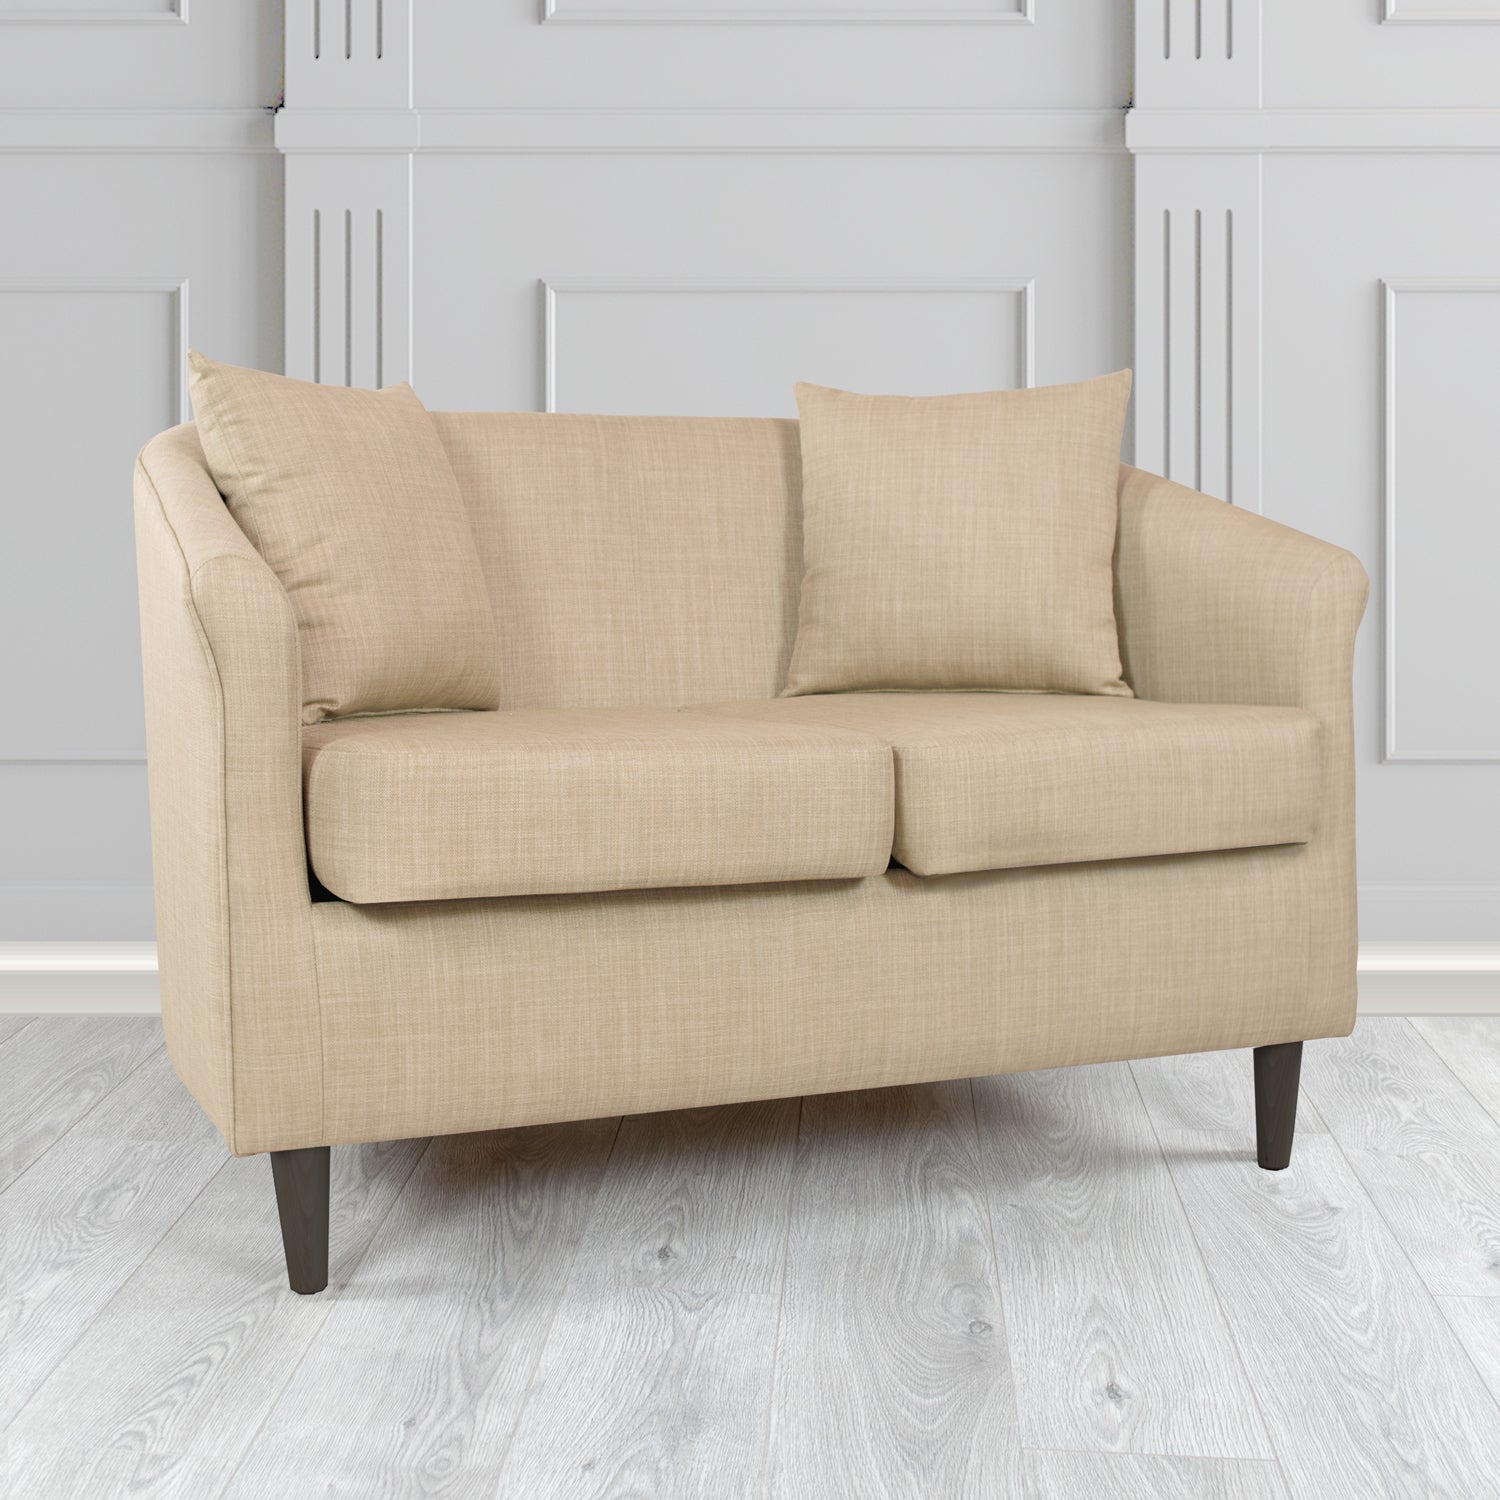 St Tropez Charles Sand Plain Linen Fabric 2 Seater Tub Sofa with Scatter Cushions - The Tub Chair Shop